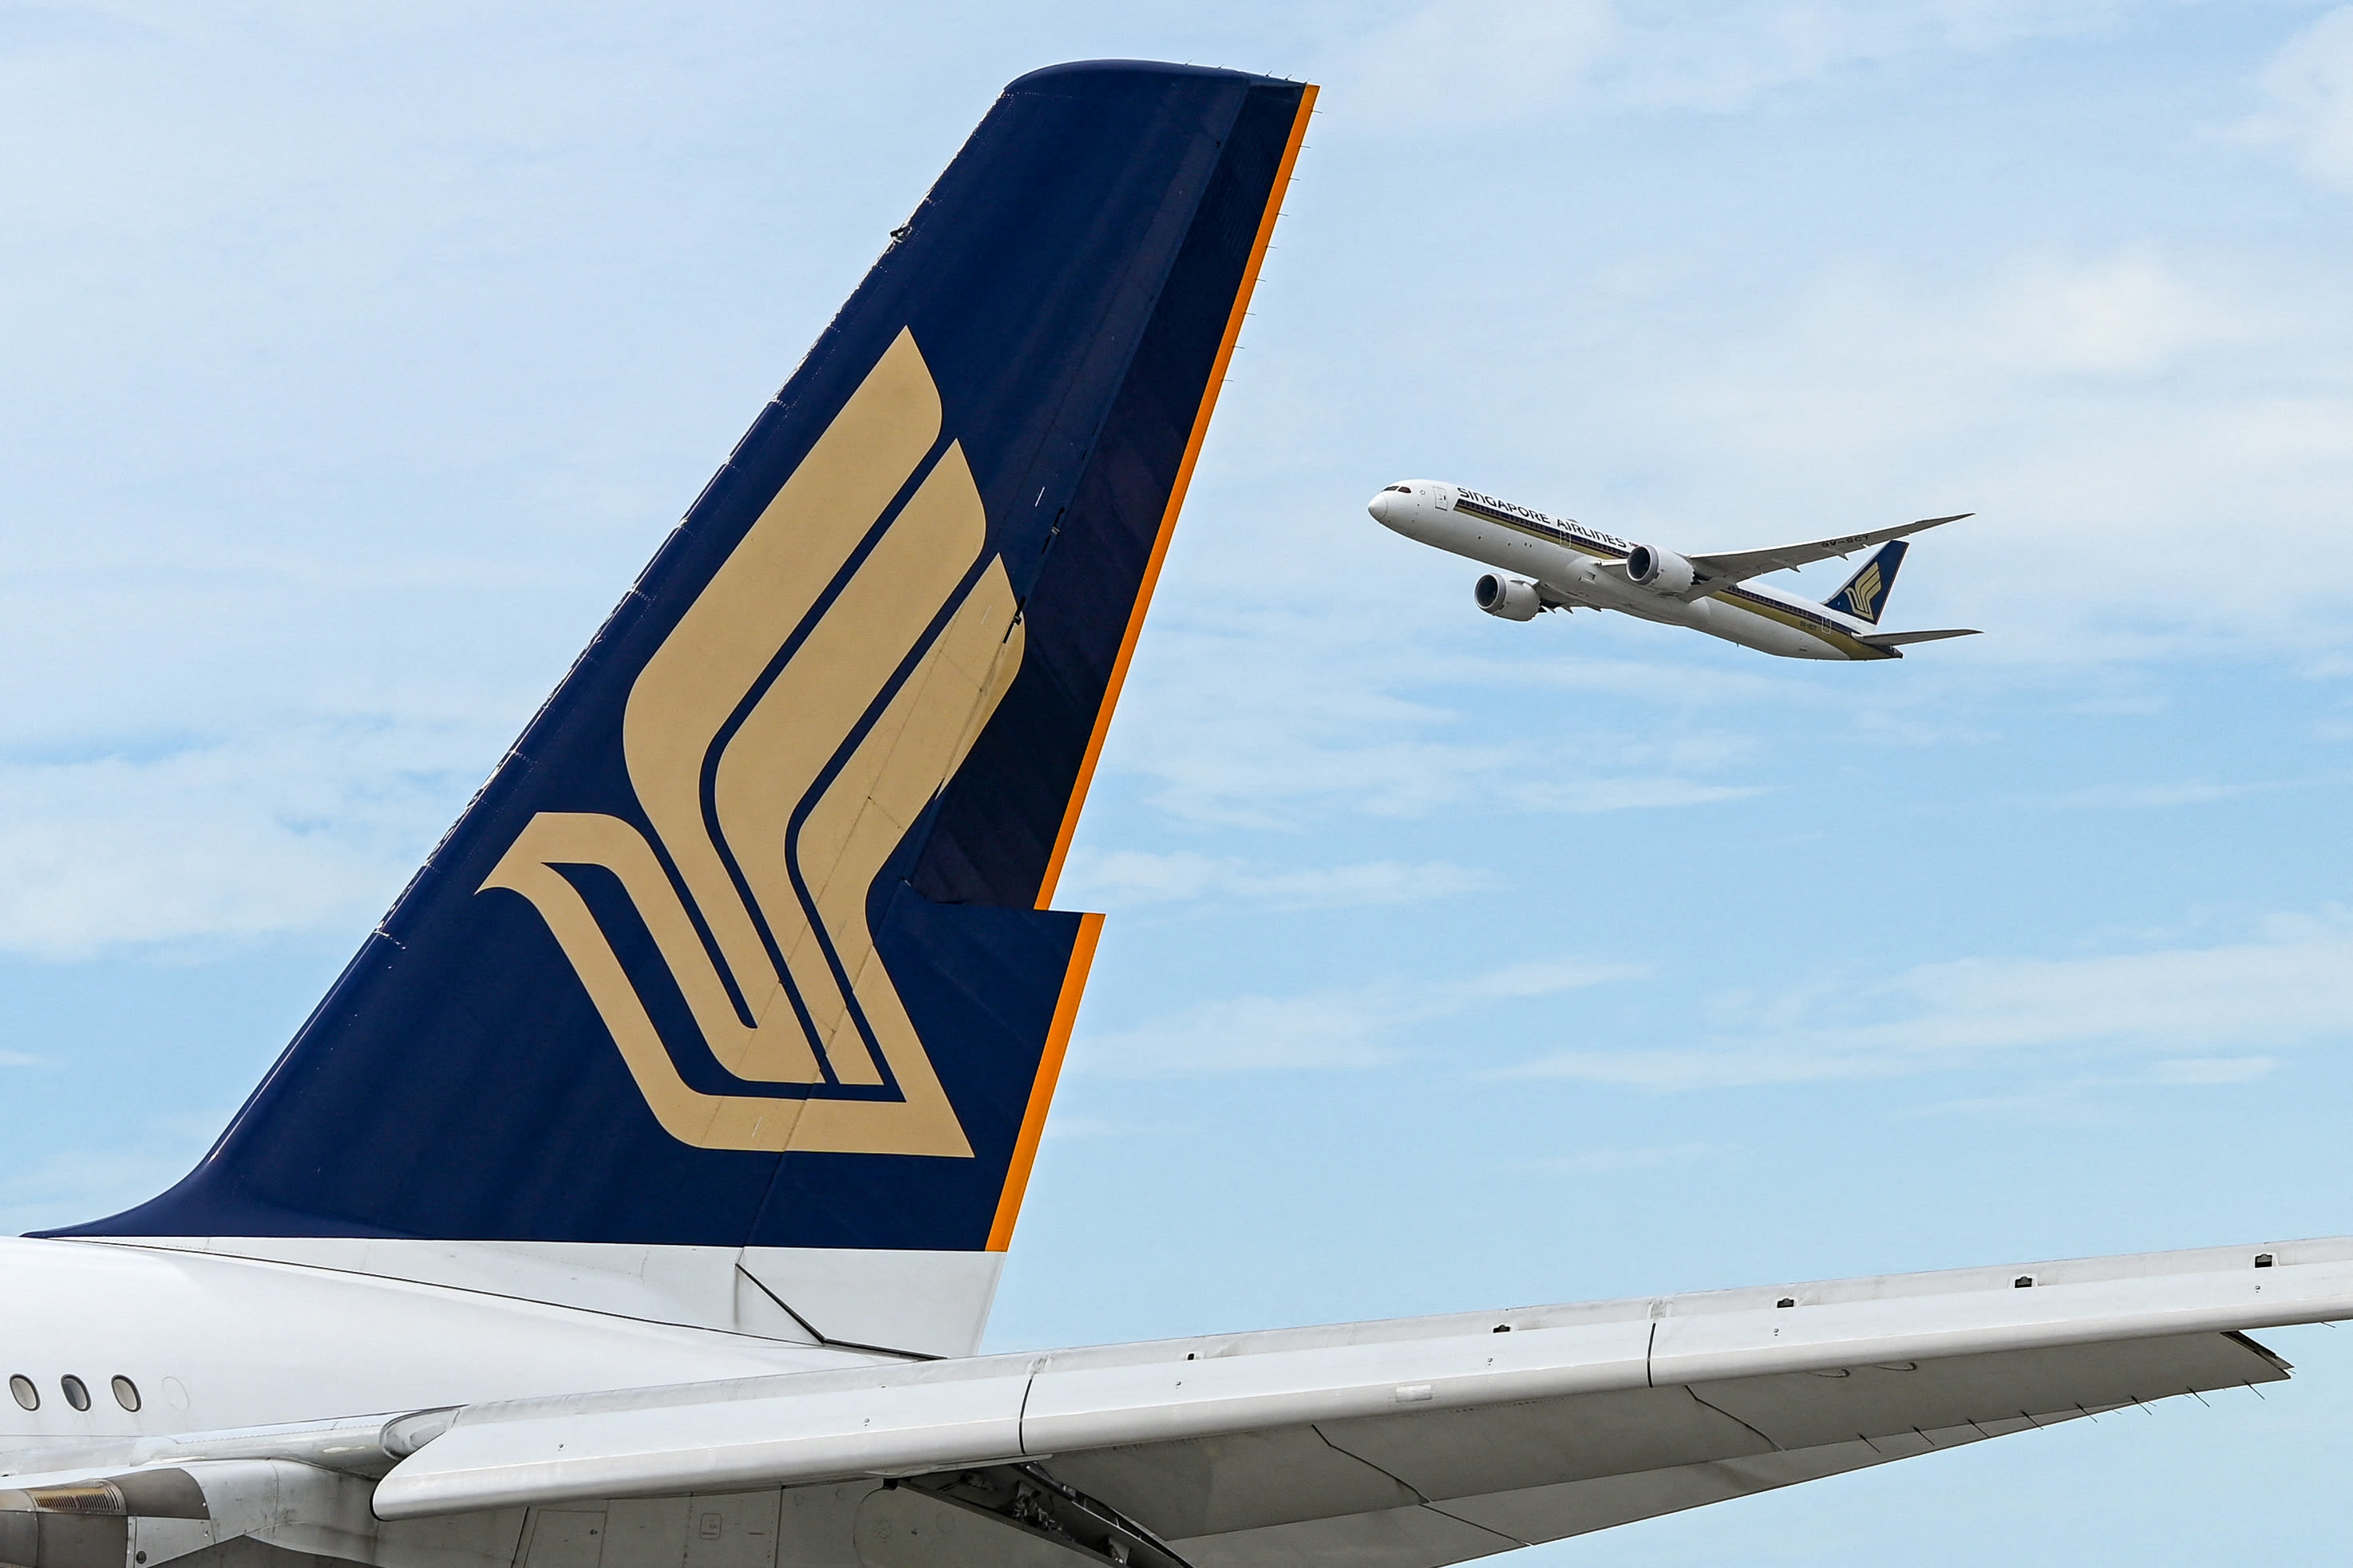 Singapore Airlines offers at least $10K for passengers injured in turbulence